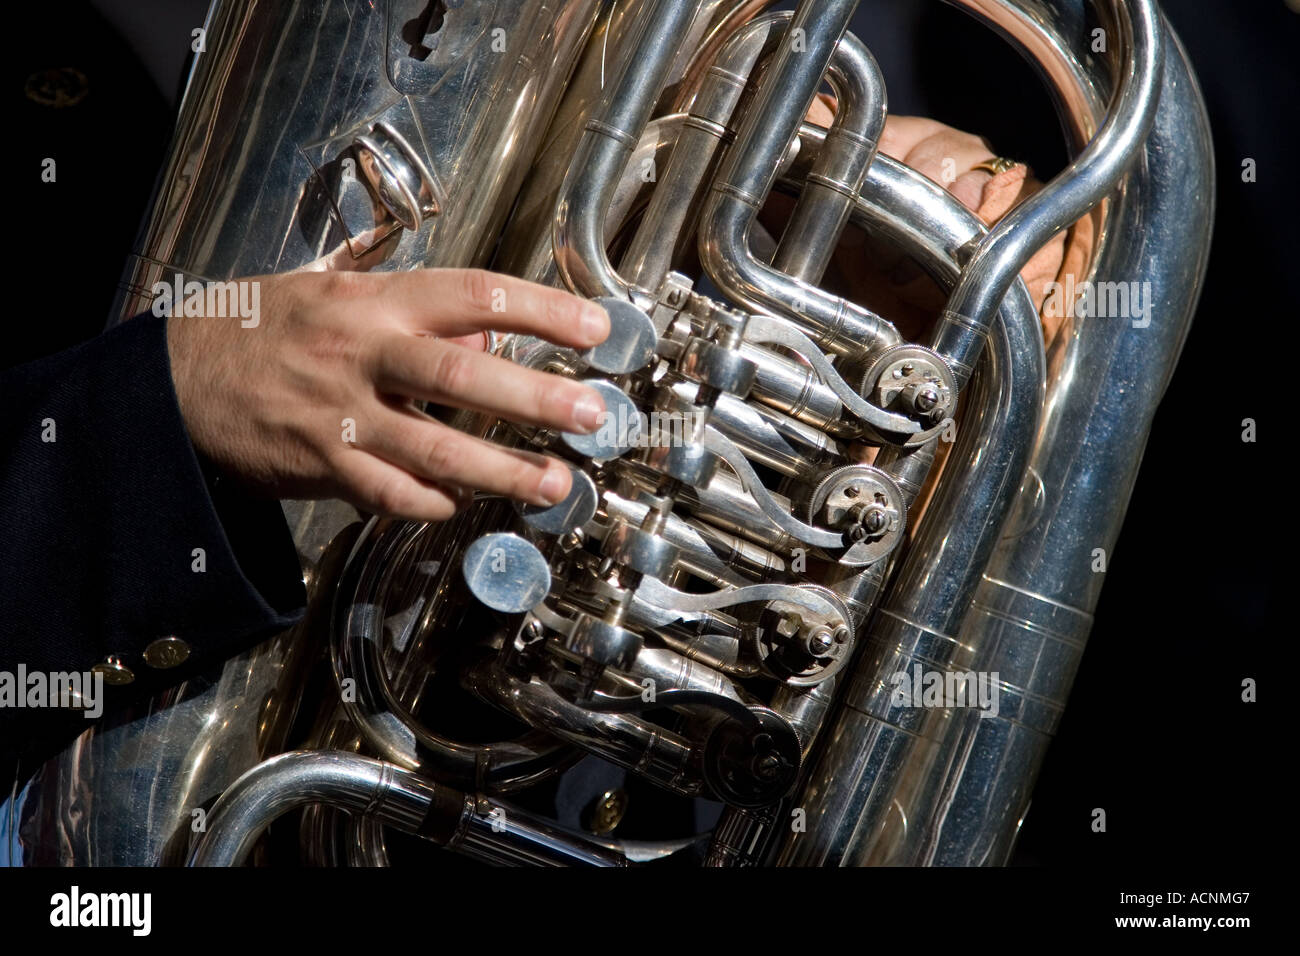 3,630 Tuba Player Images, Stock Photos, 3D objects, & Vectors